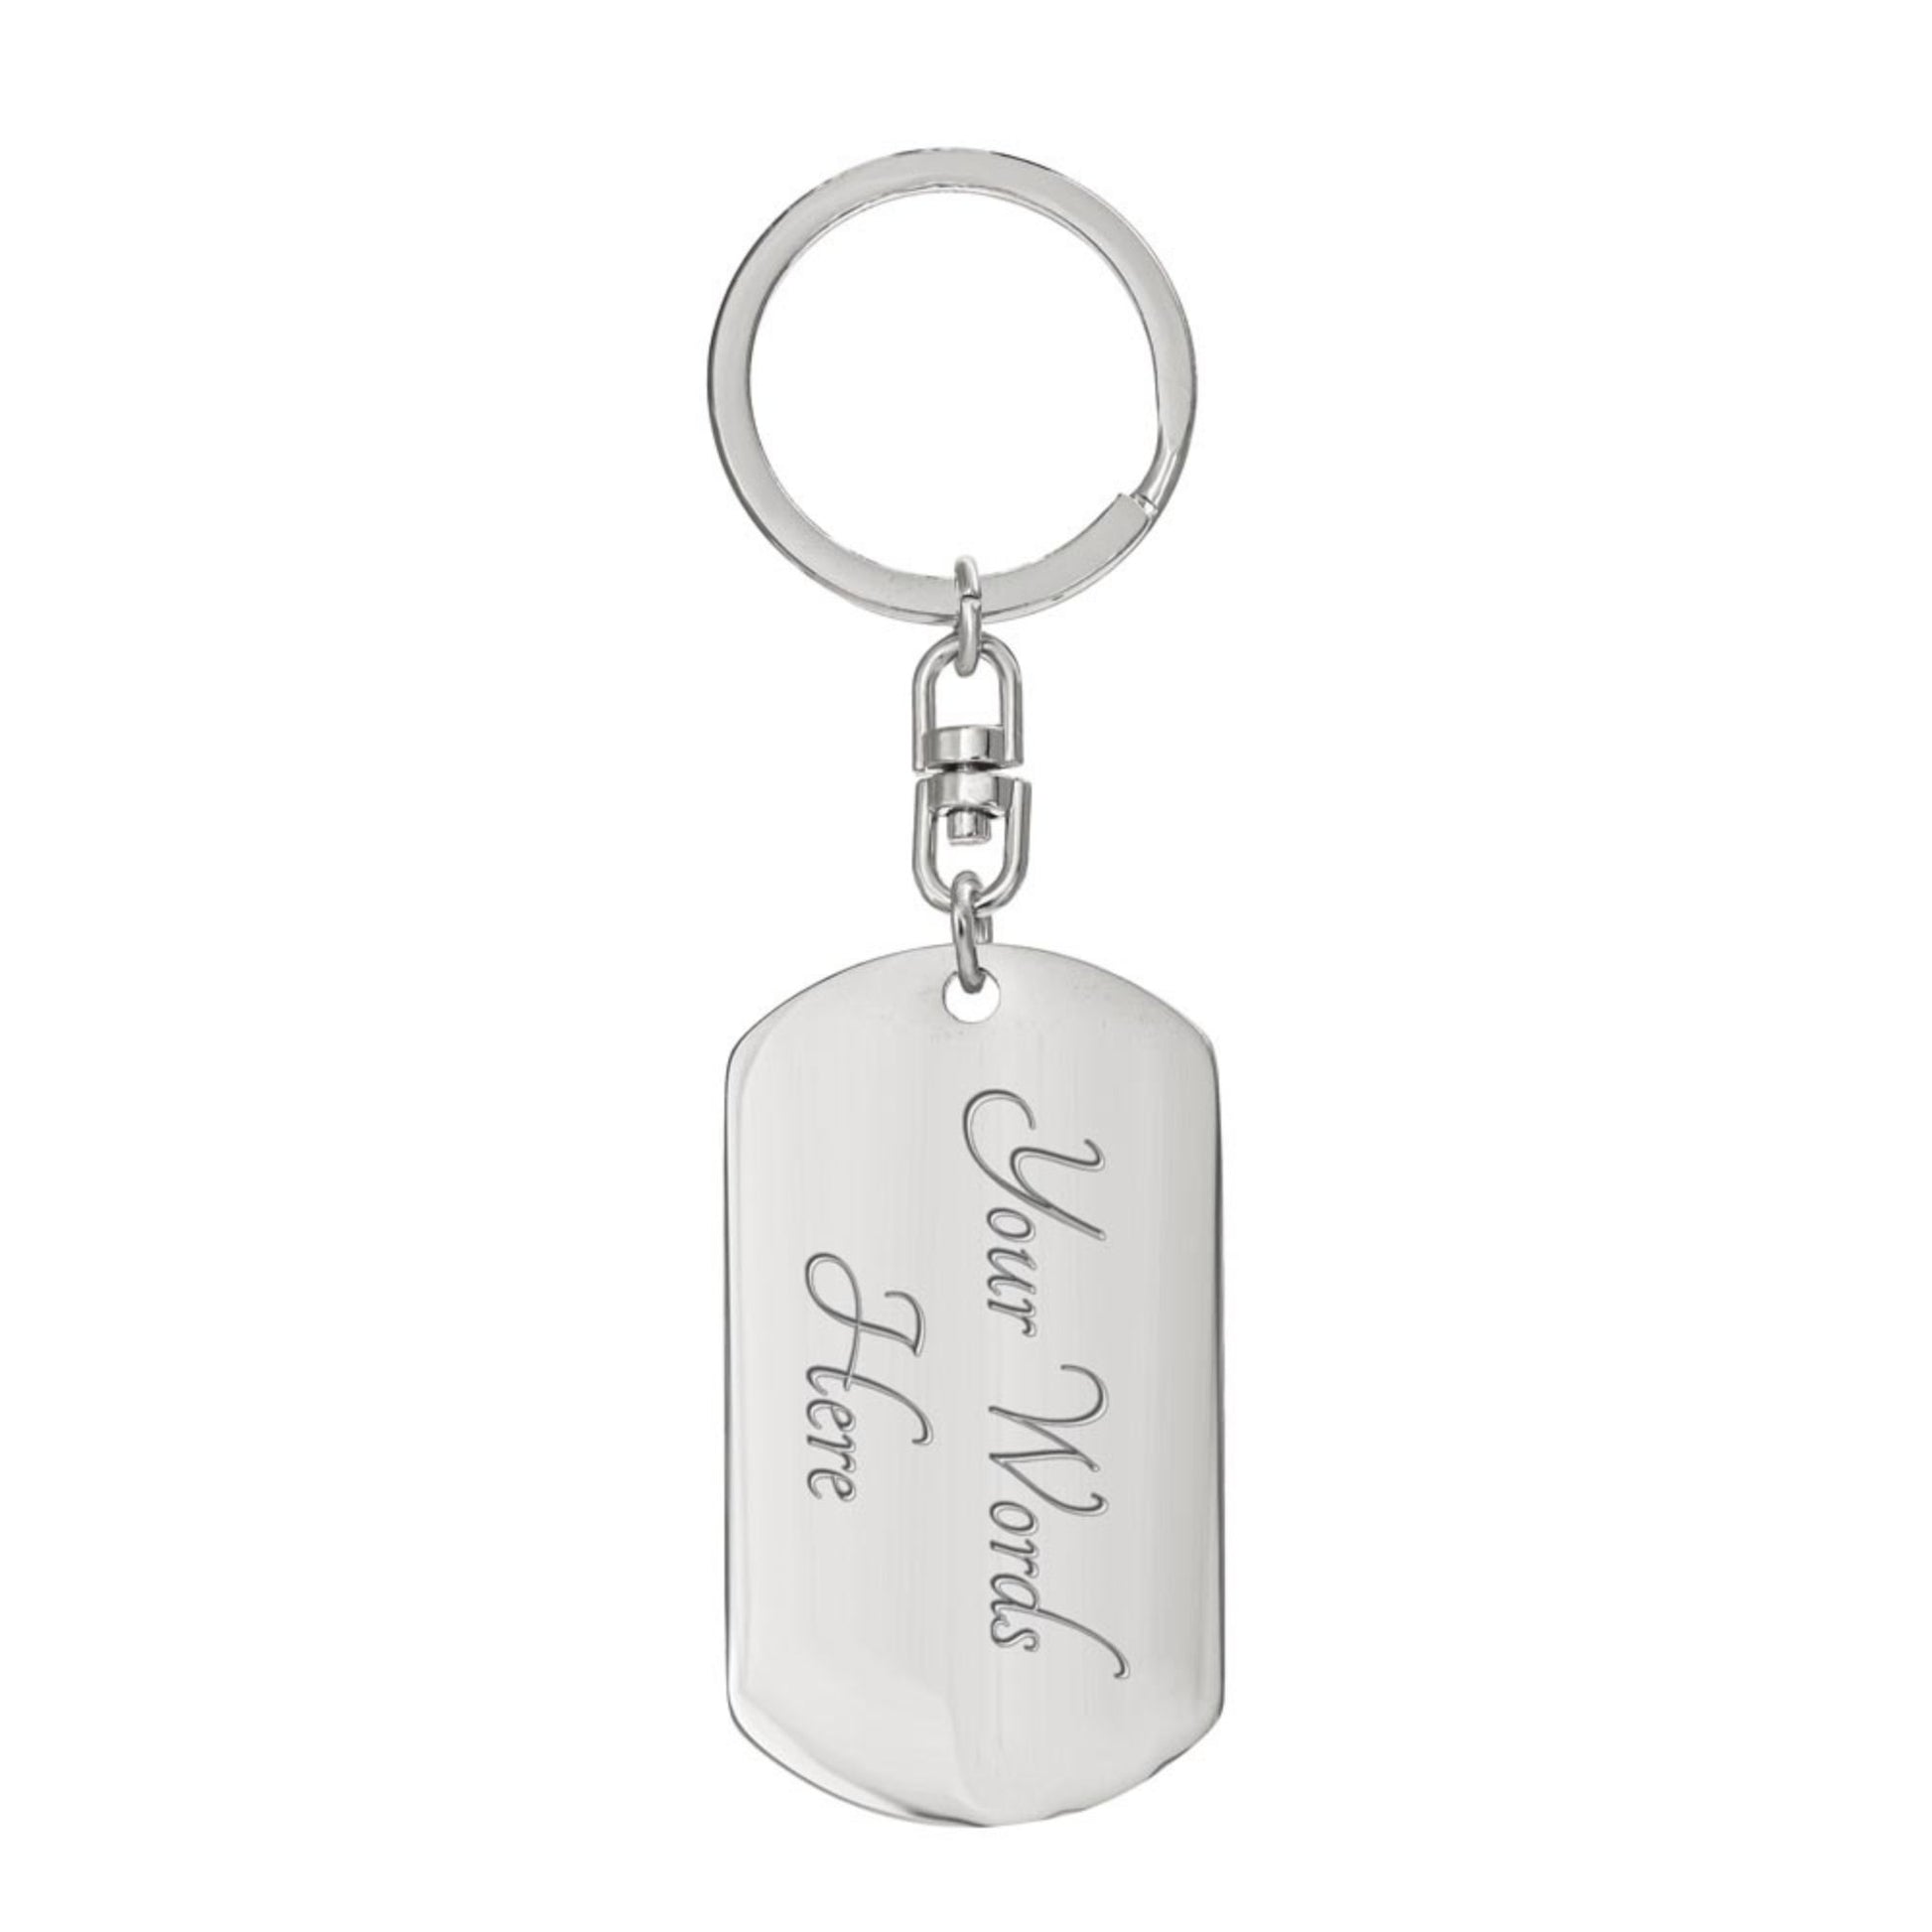 Be Strong and Courageous - Orange Dog Tag with Swivel Keychain Engraving: No Jesus Passion Apparel